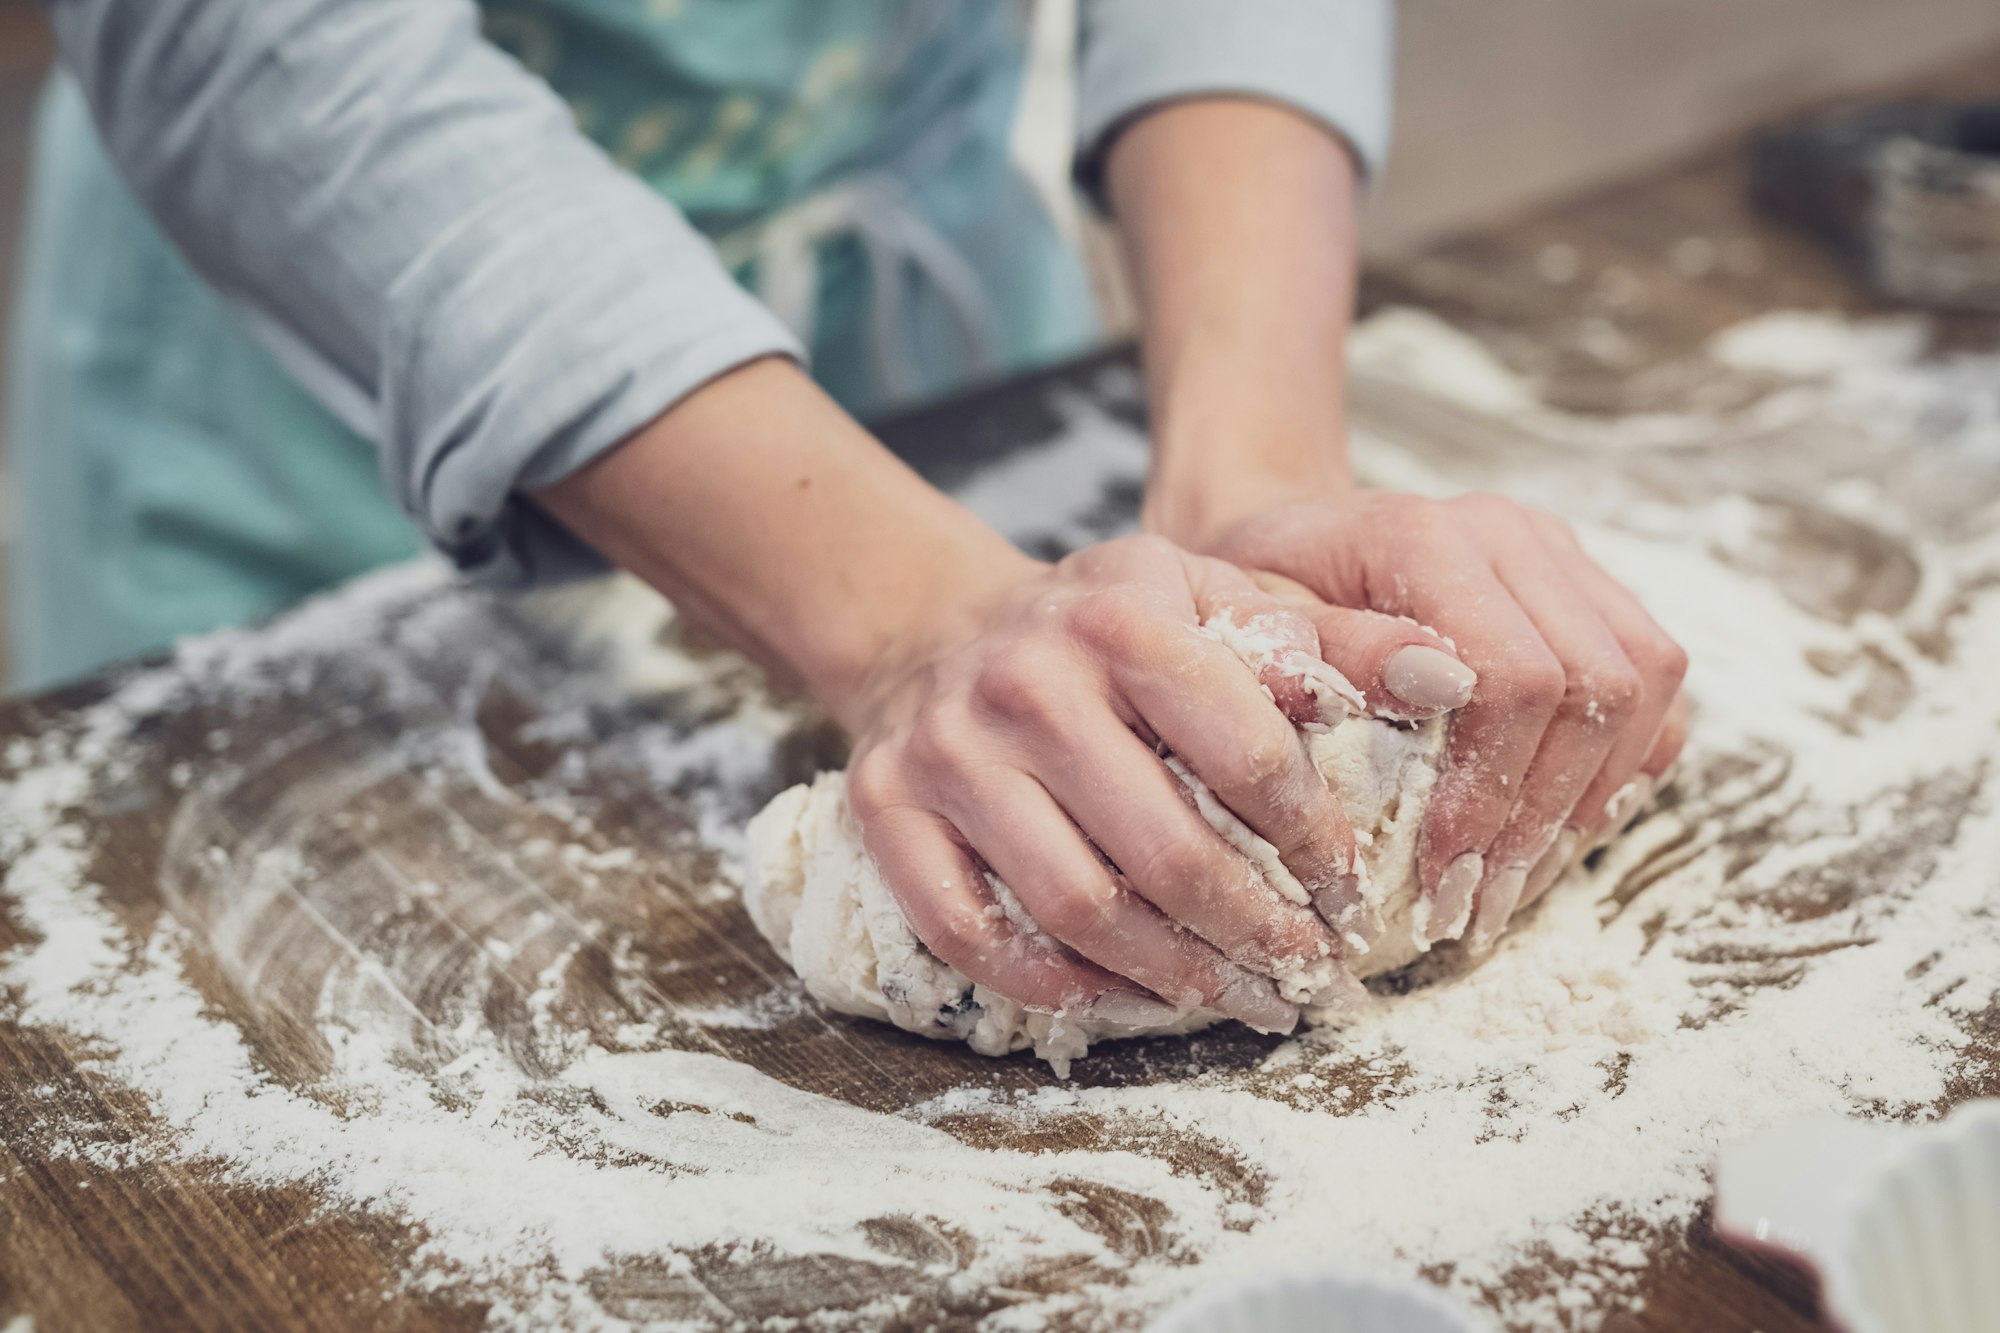 Wholemeal or refined flour? How are they different?